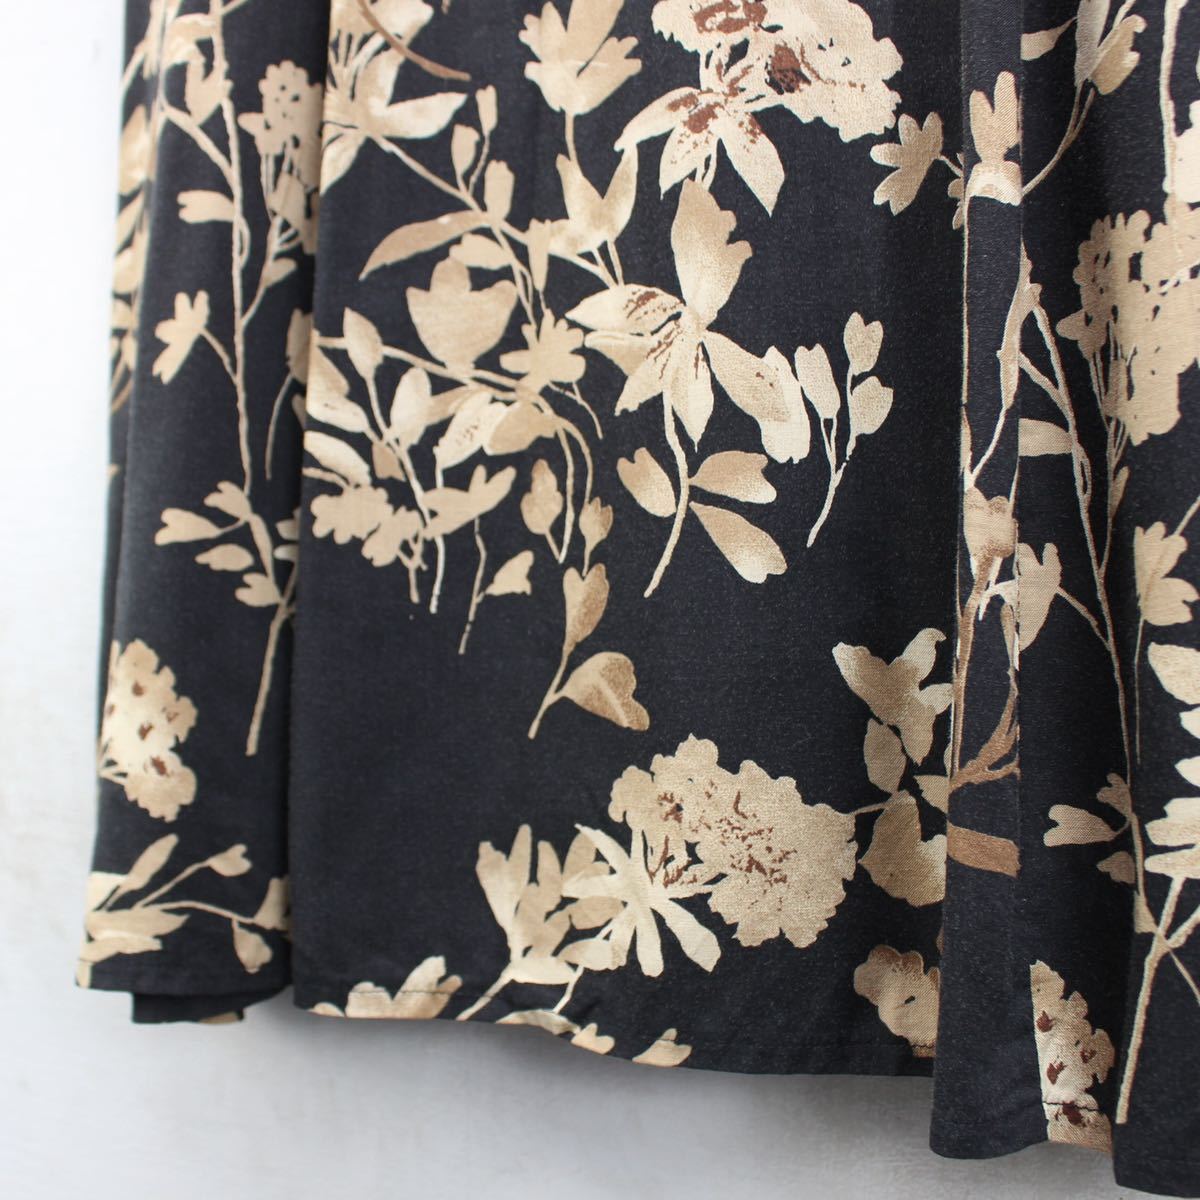 USA VINTAGE FLOWER PATTERNED LAYARD DESIGN NO SLEEVE ONE PIECE/アメリカ古着花柄レイヤードデザインノースリーブワンピース_画像8